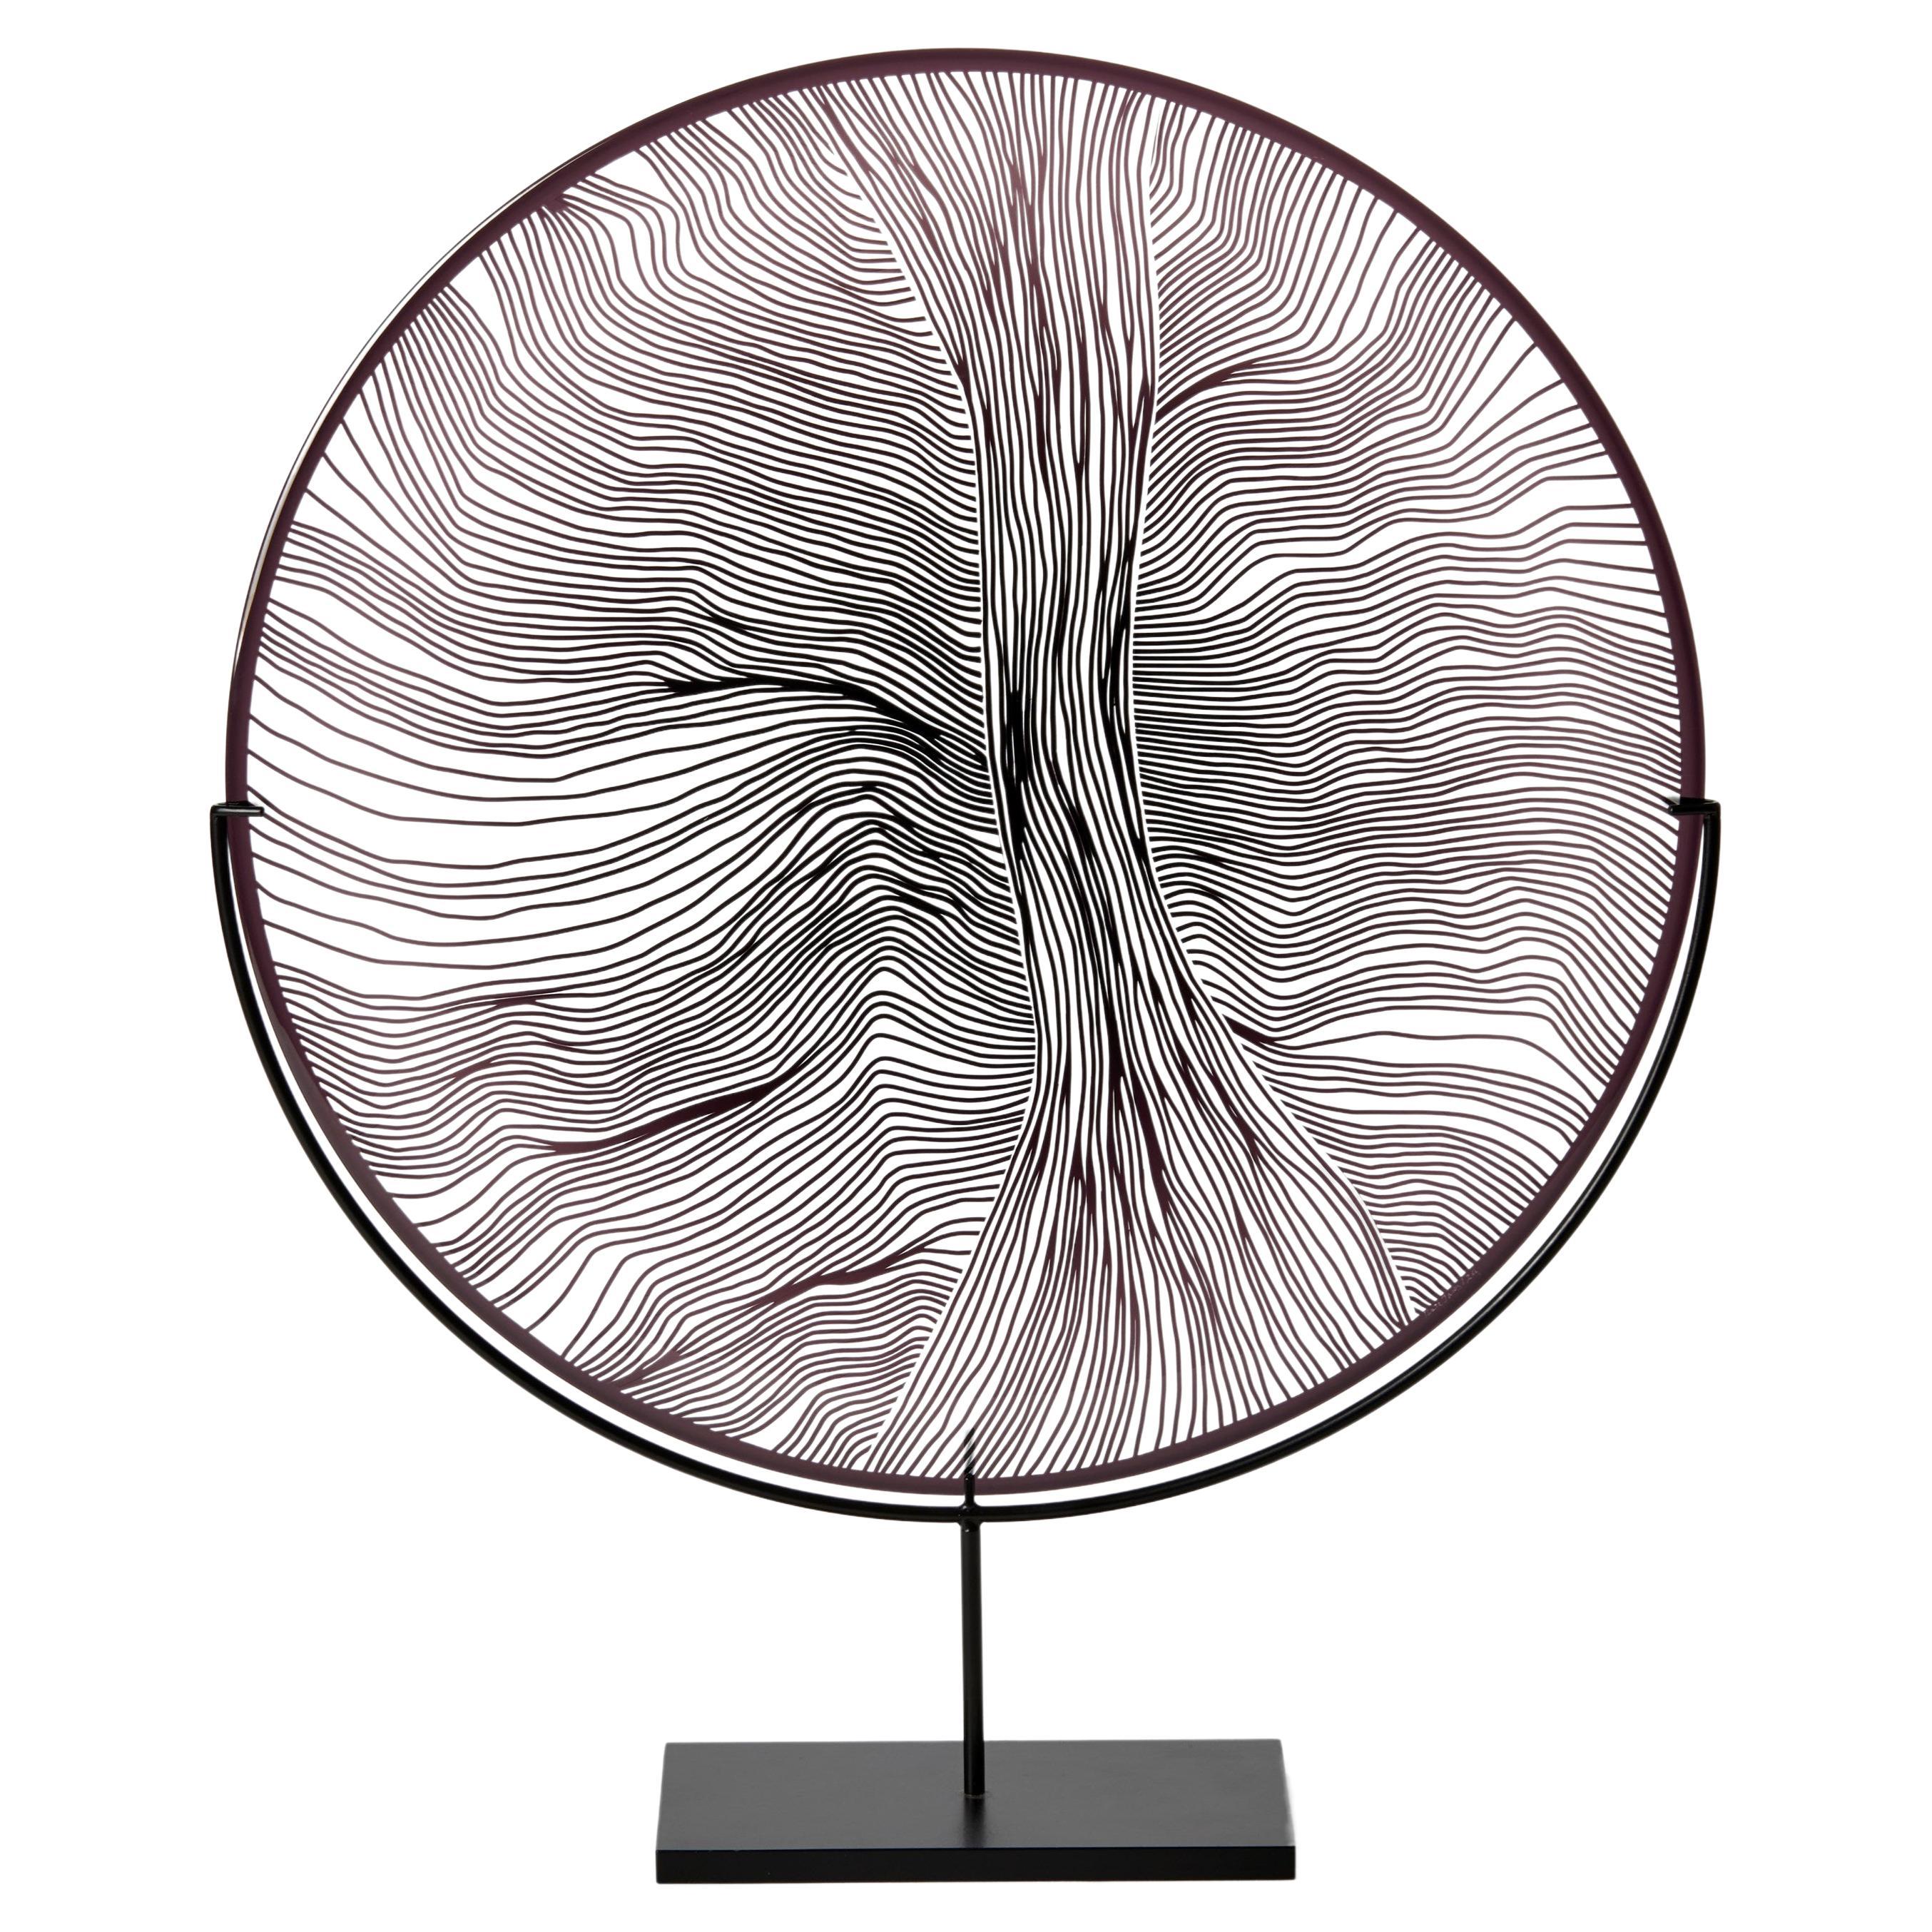 Solar Storm Monochrome III, abstract cut patterned glass artwork by Kate Jones For Sale